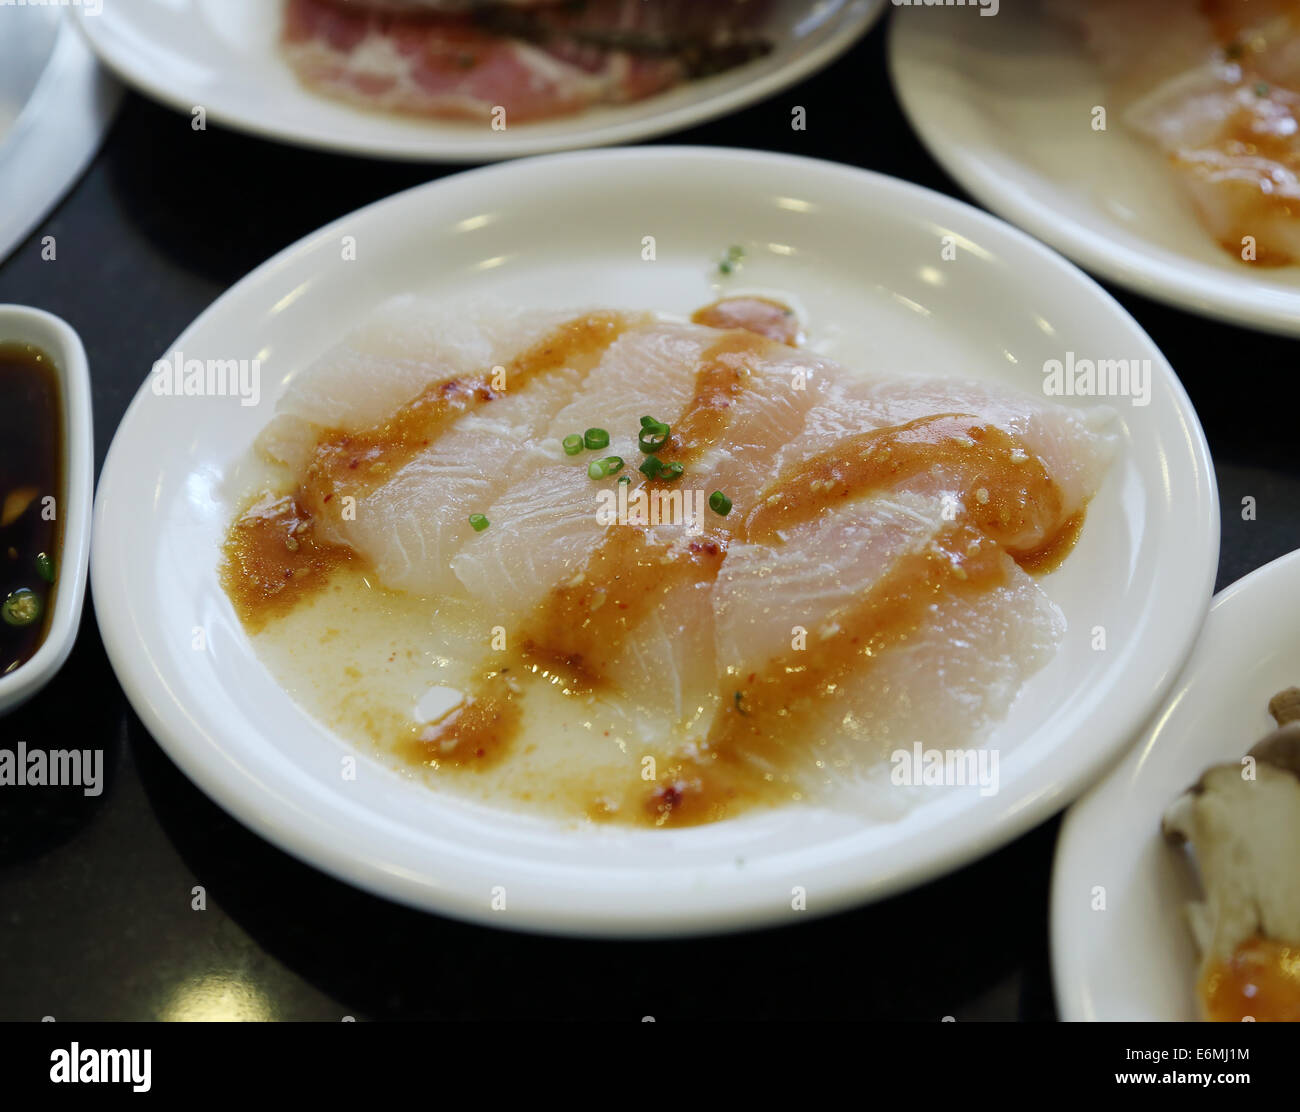 Fish fillet with sauce in plate Stock Photo